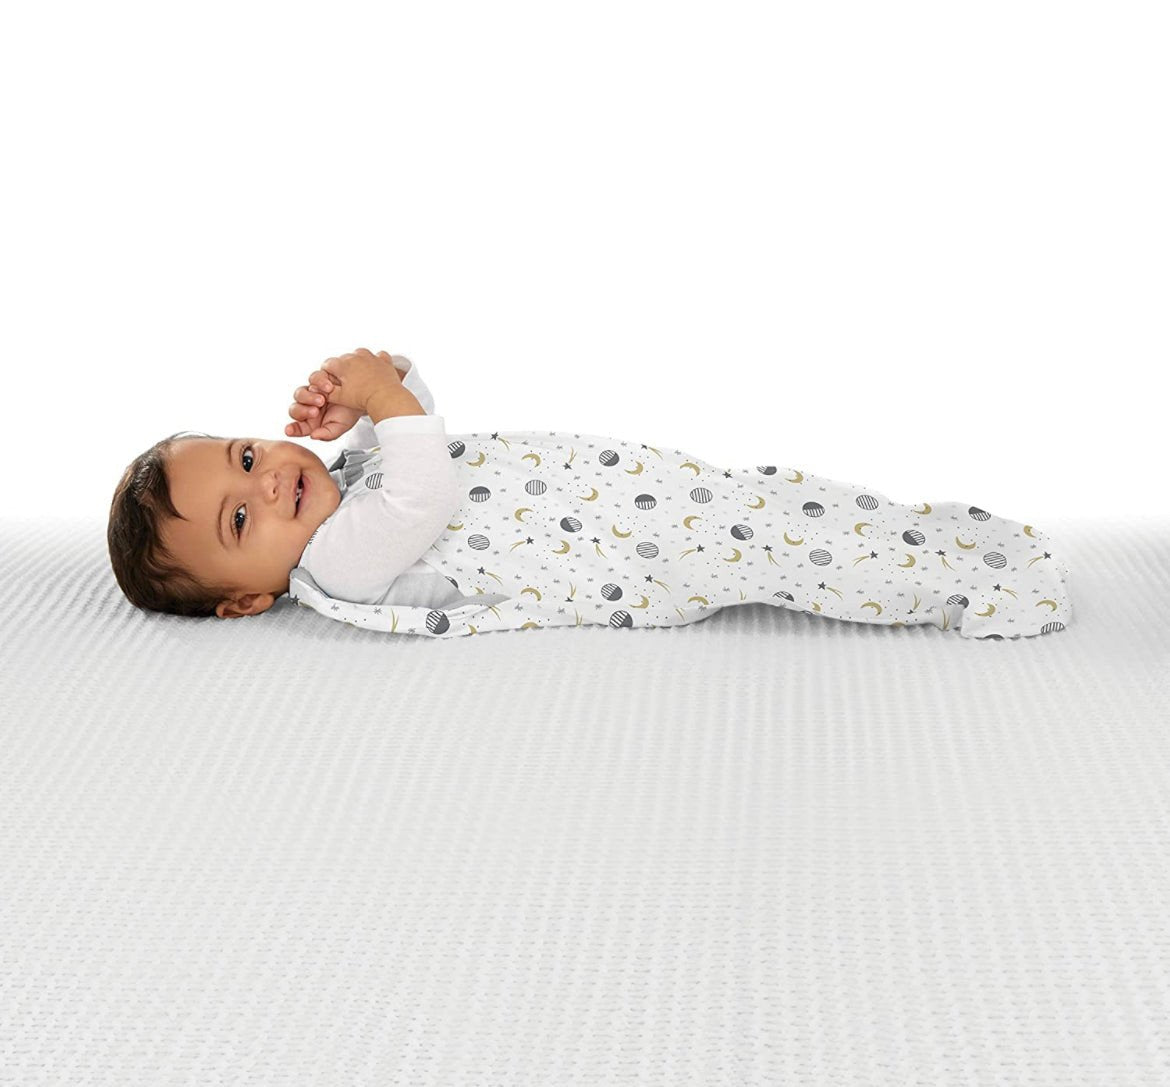 SwaddleMe Arms Free Convertible Pod – Size Large, 4-6 Months, 2-Pack.